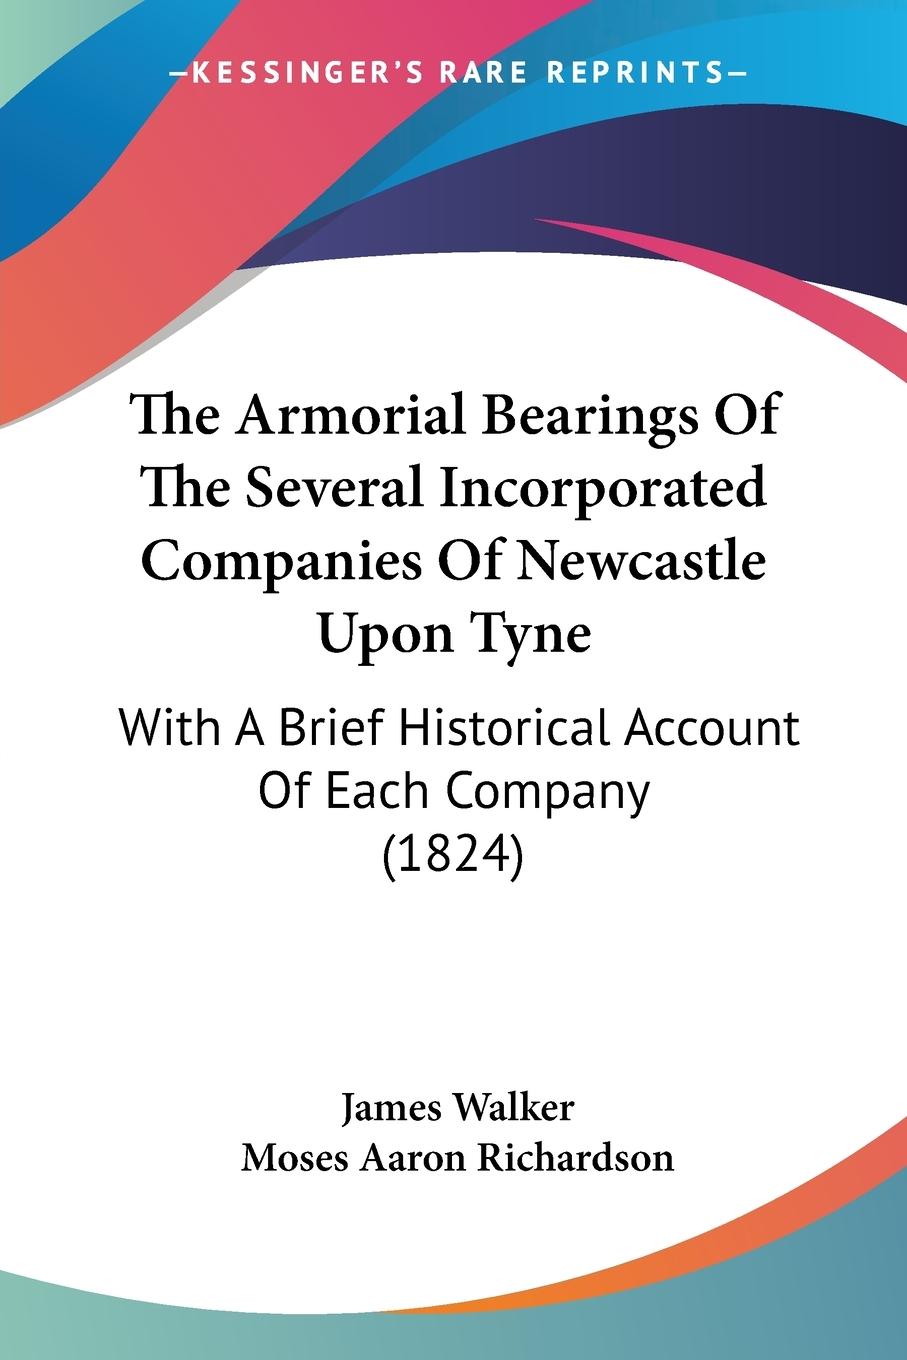 The Armorial Bearings Of The Several Incorporated Companies Of Newcastle Upon Tyne - Walker, James Richardson, Moses Aaron